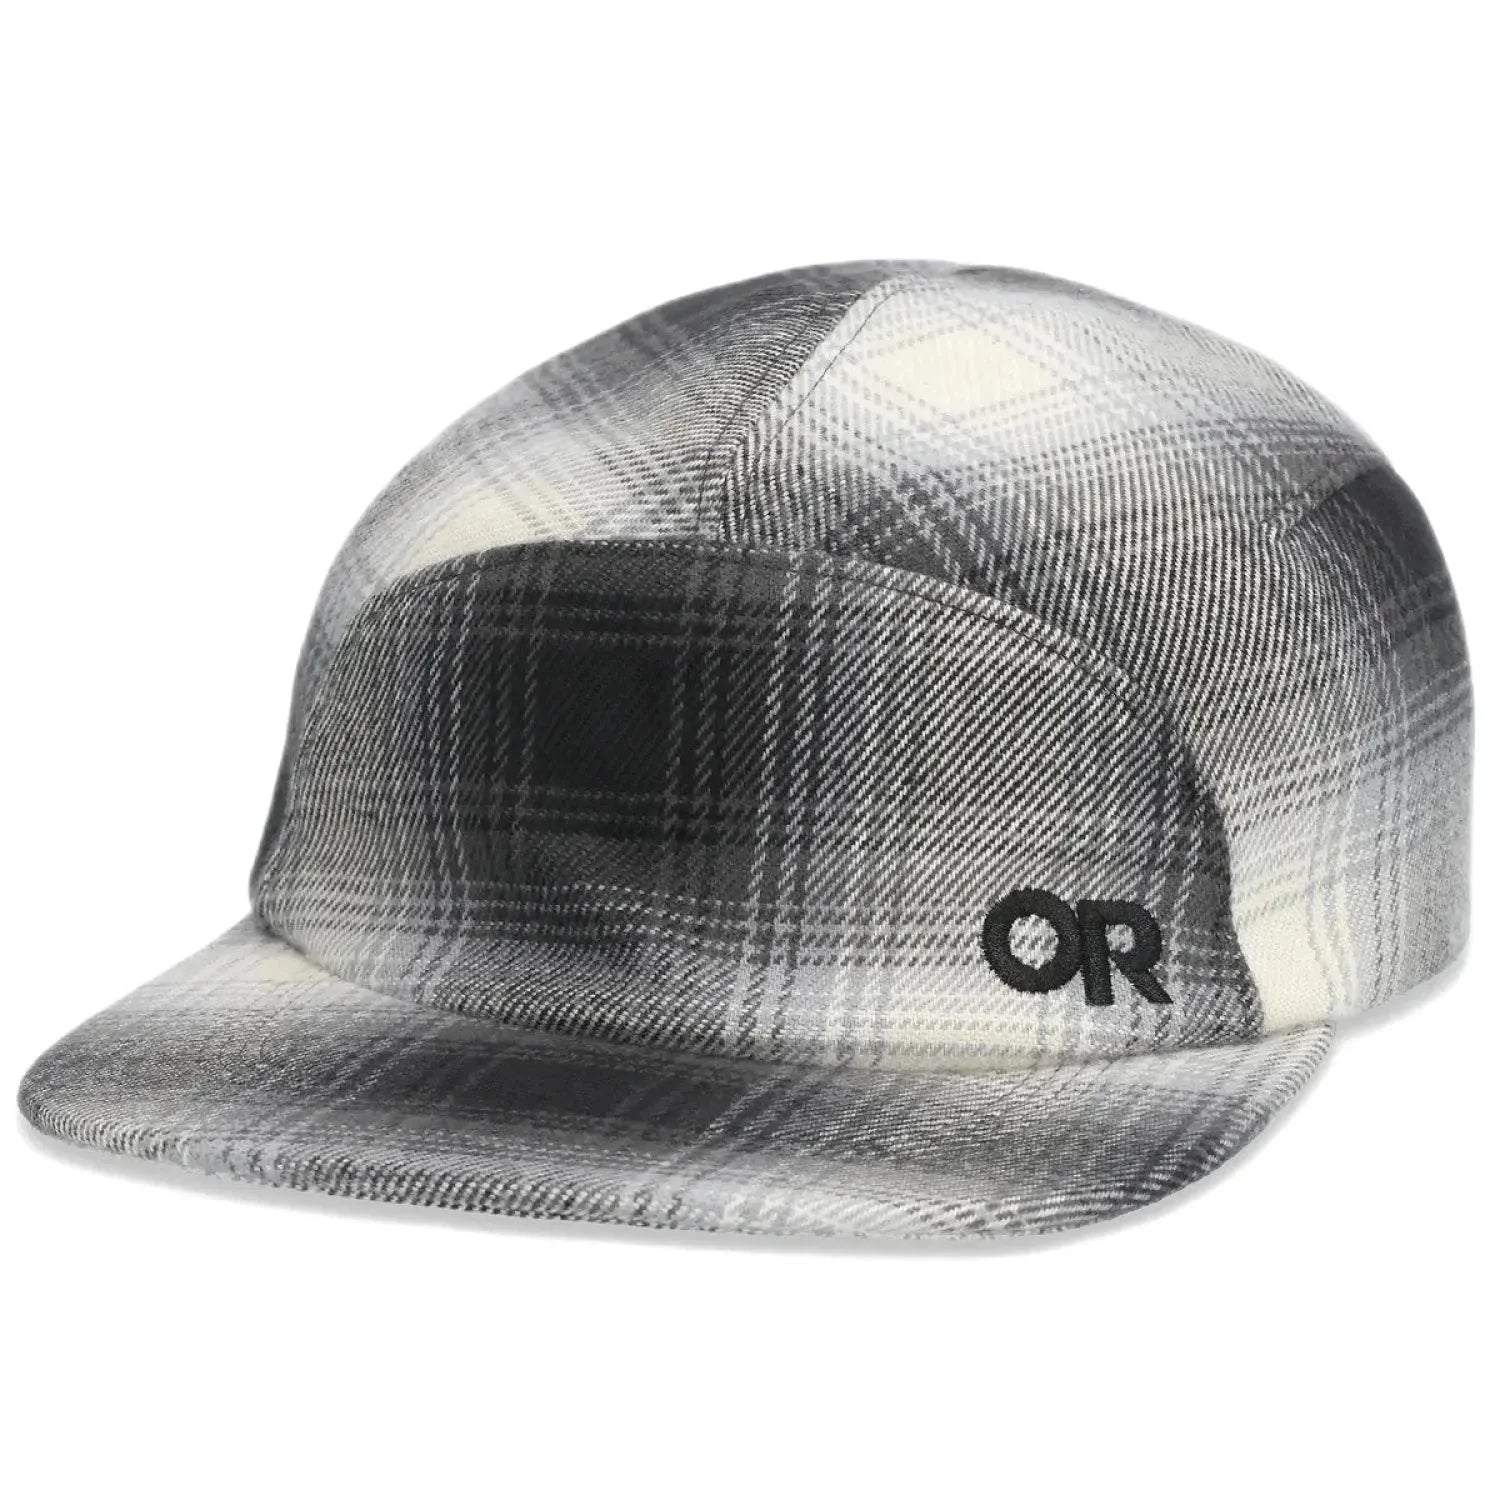 Outdoor Research Feedback Flannel Cap shown in Black, front view.